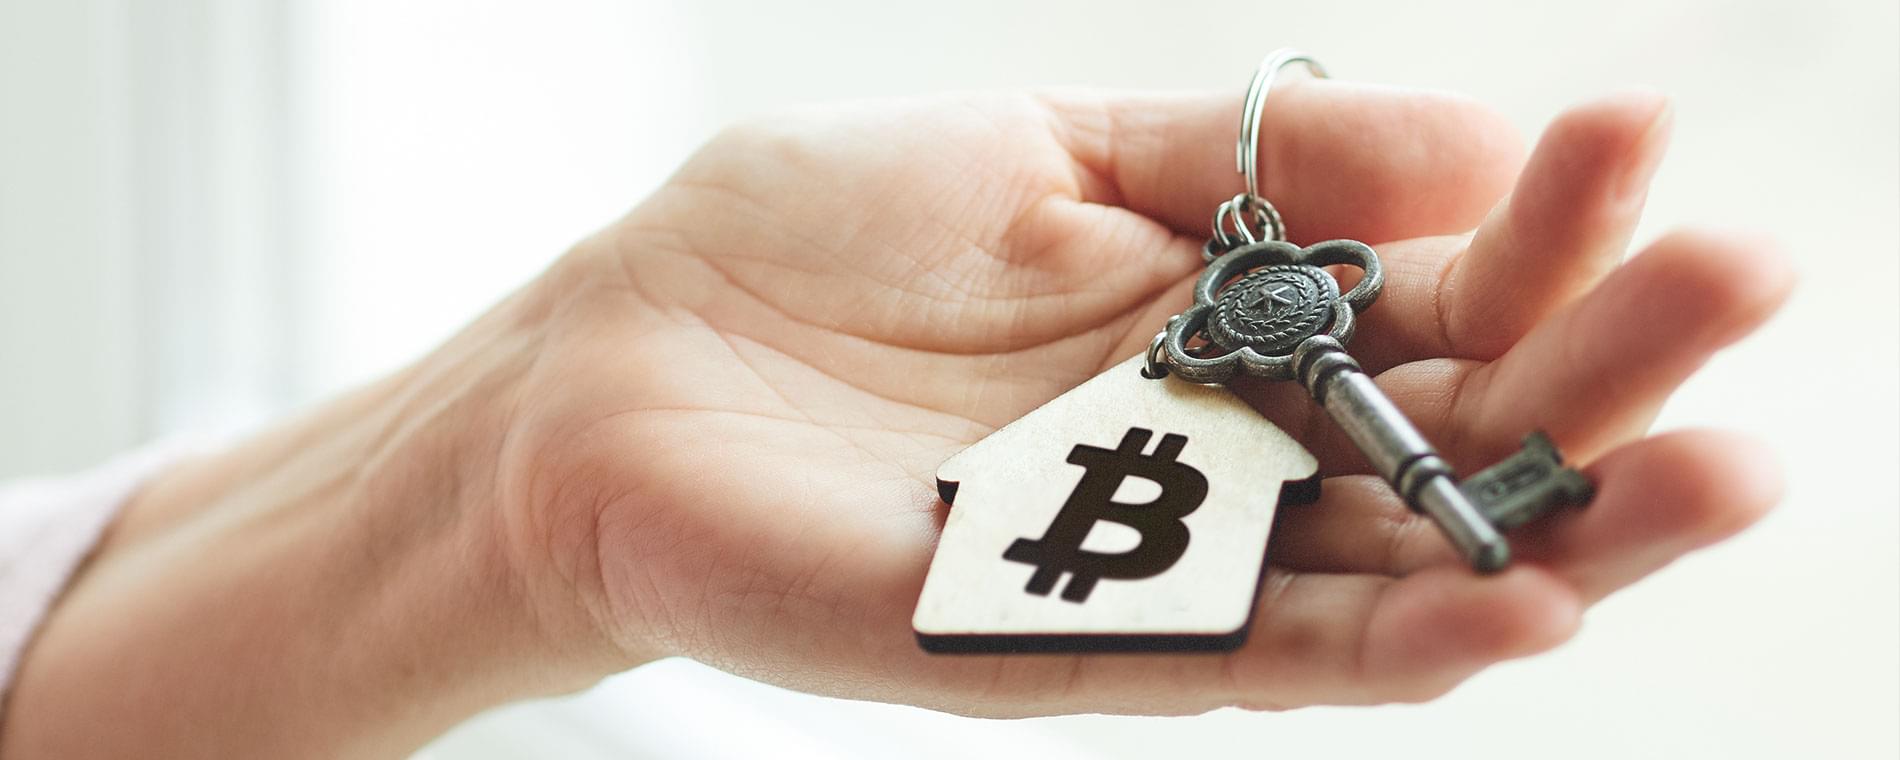 You can now buy a house or pay rent with Bitcoin